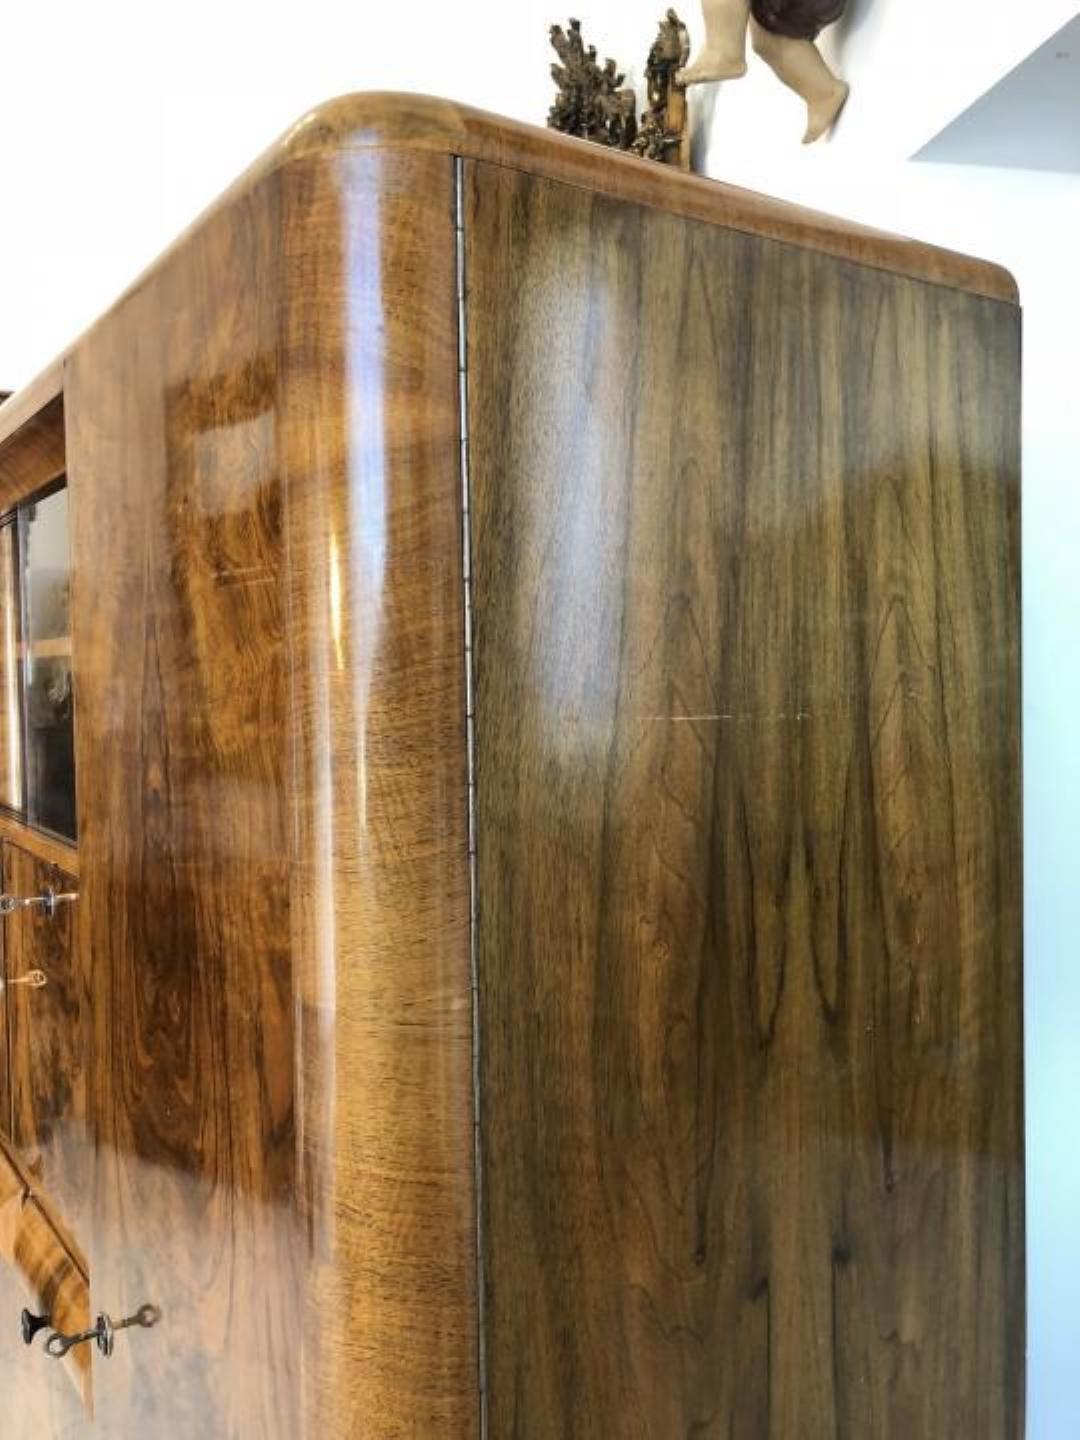 Art Deco Vintage 1930s Book Cabinet with a Stunning Walnut Grain